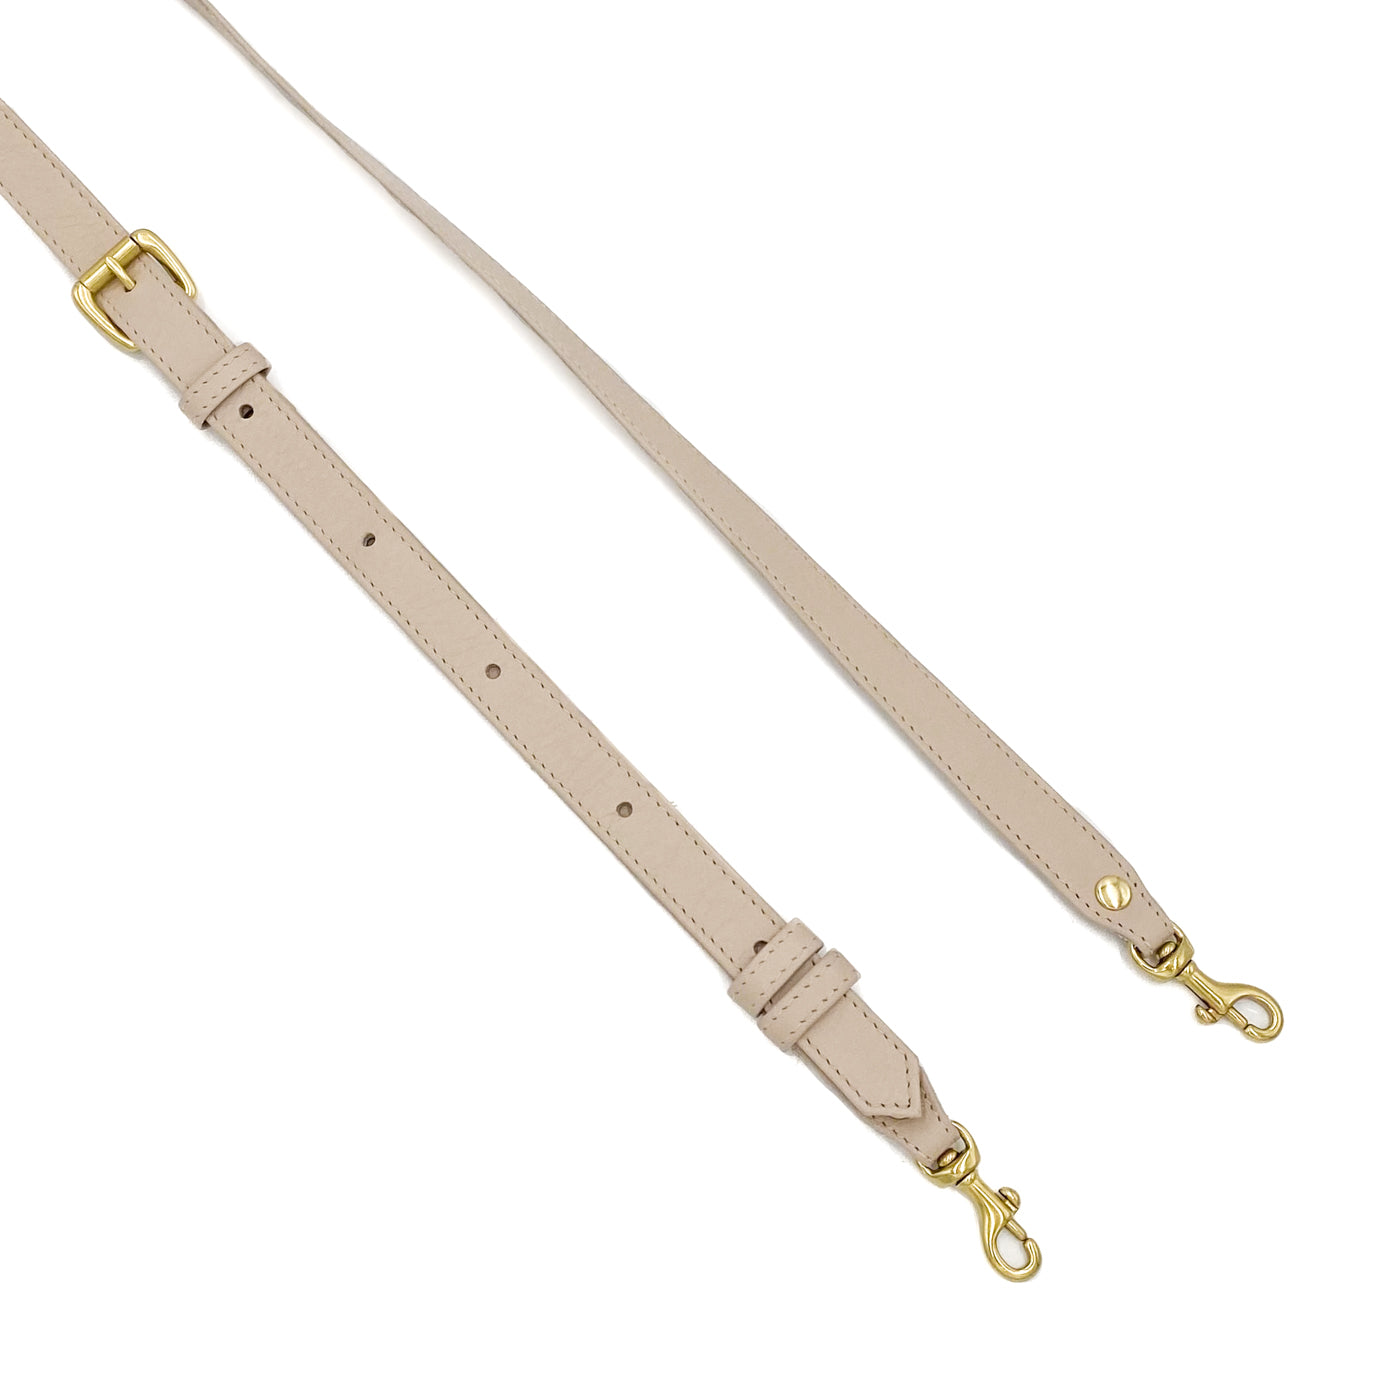 Leather adjustable crossbody strap in the color light pink with gold hardware